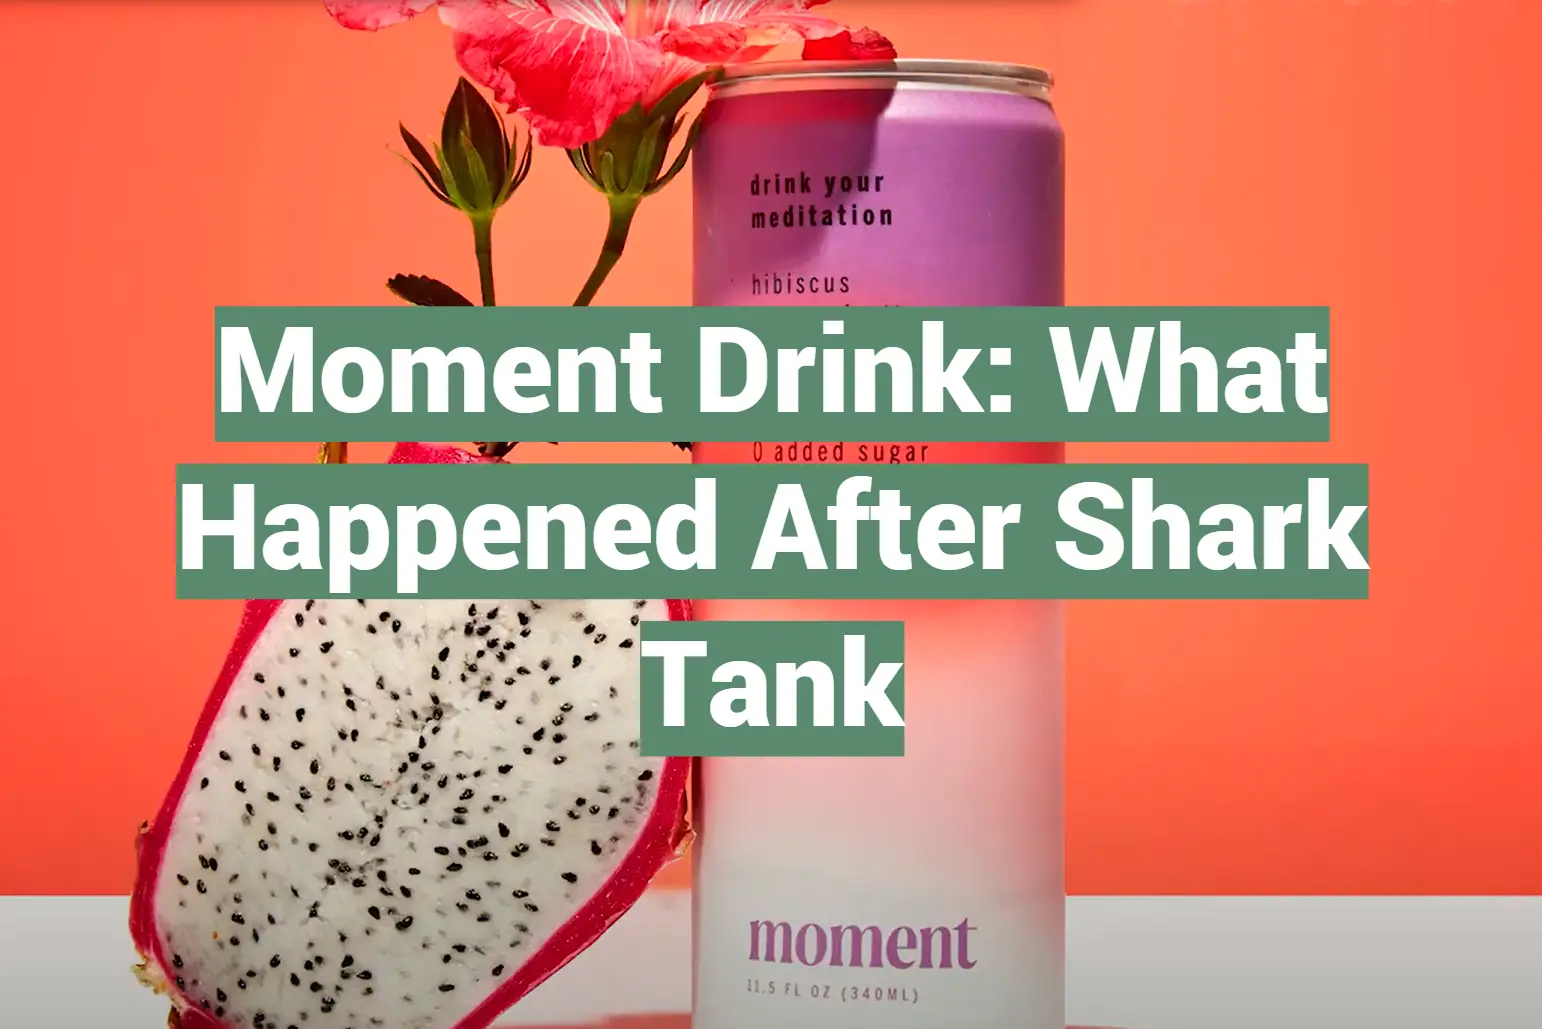 Moment Drink: What Happened After Shark Tank